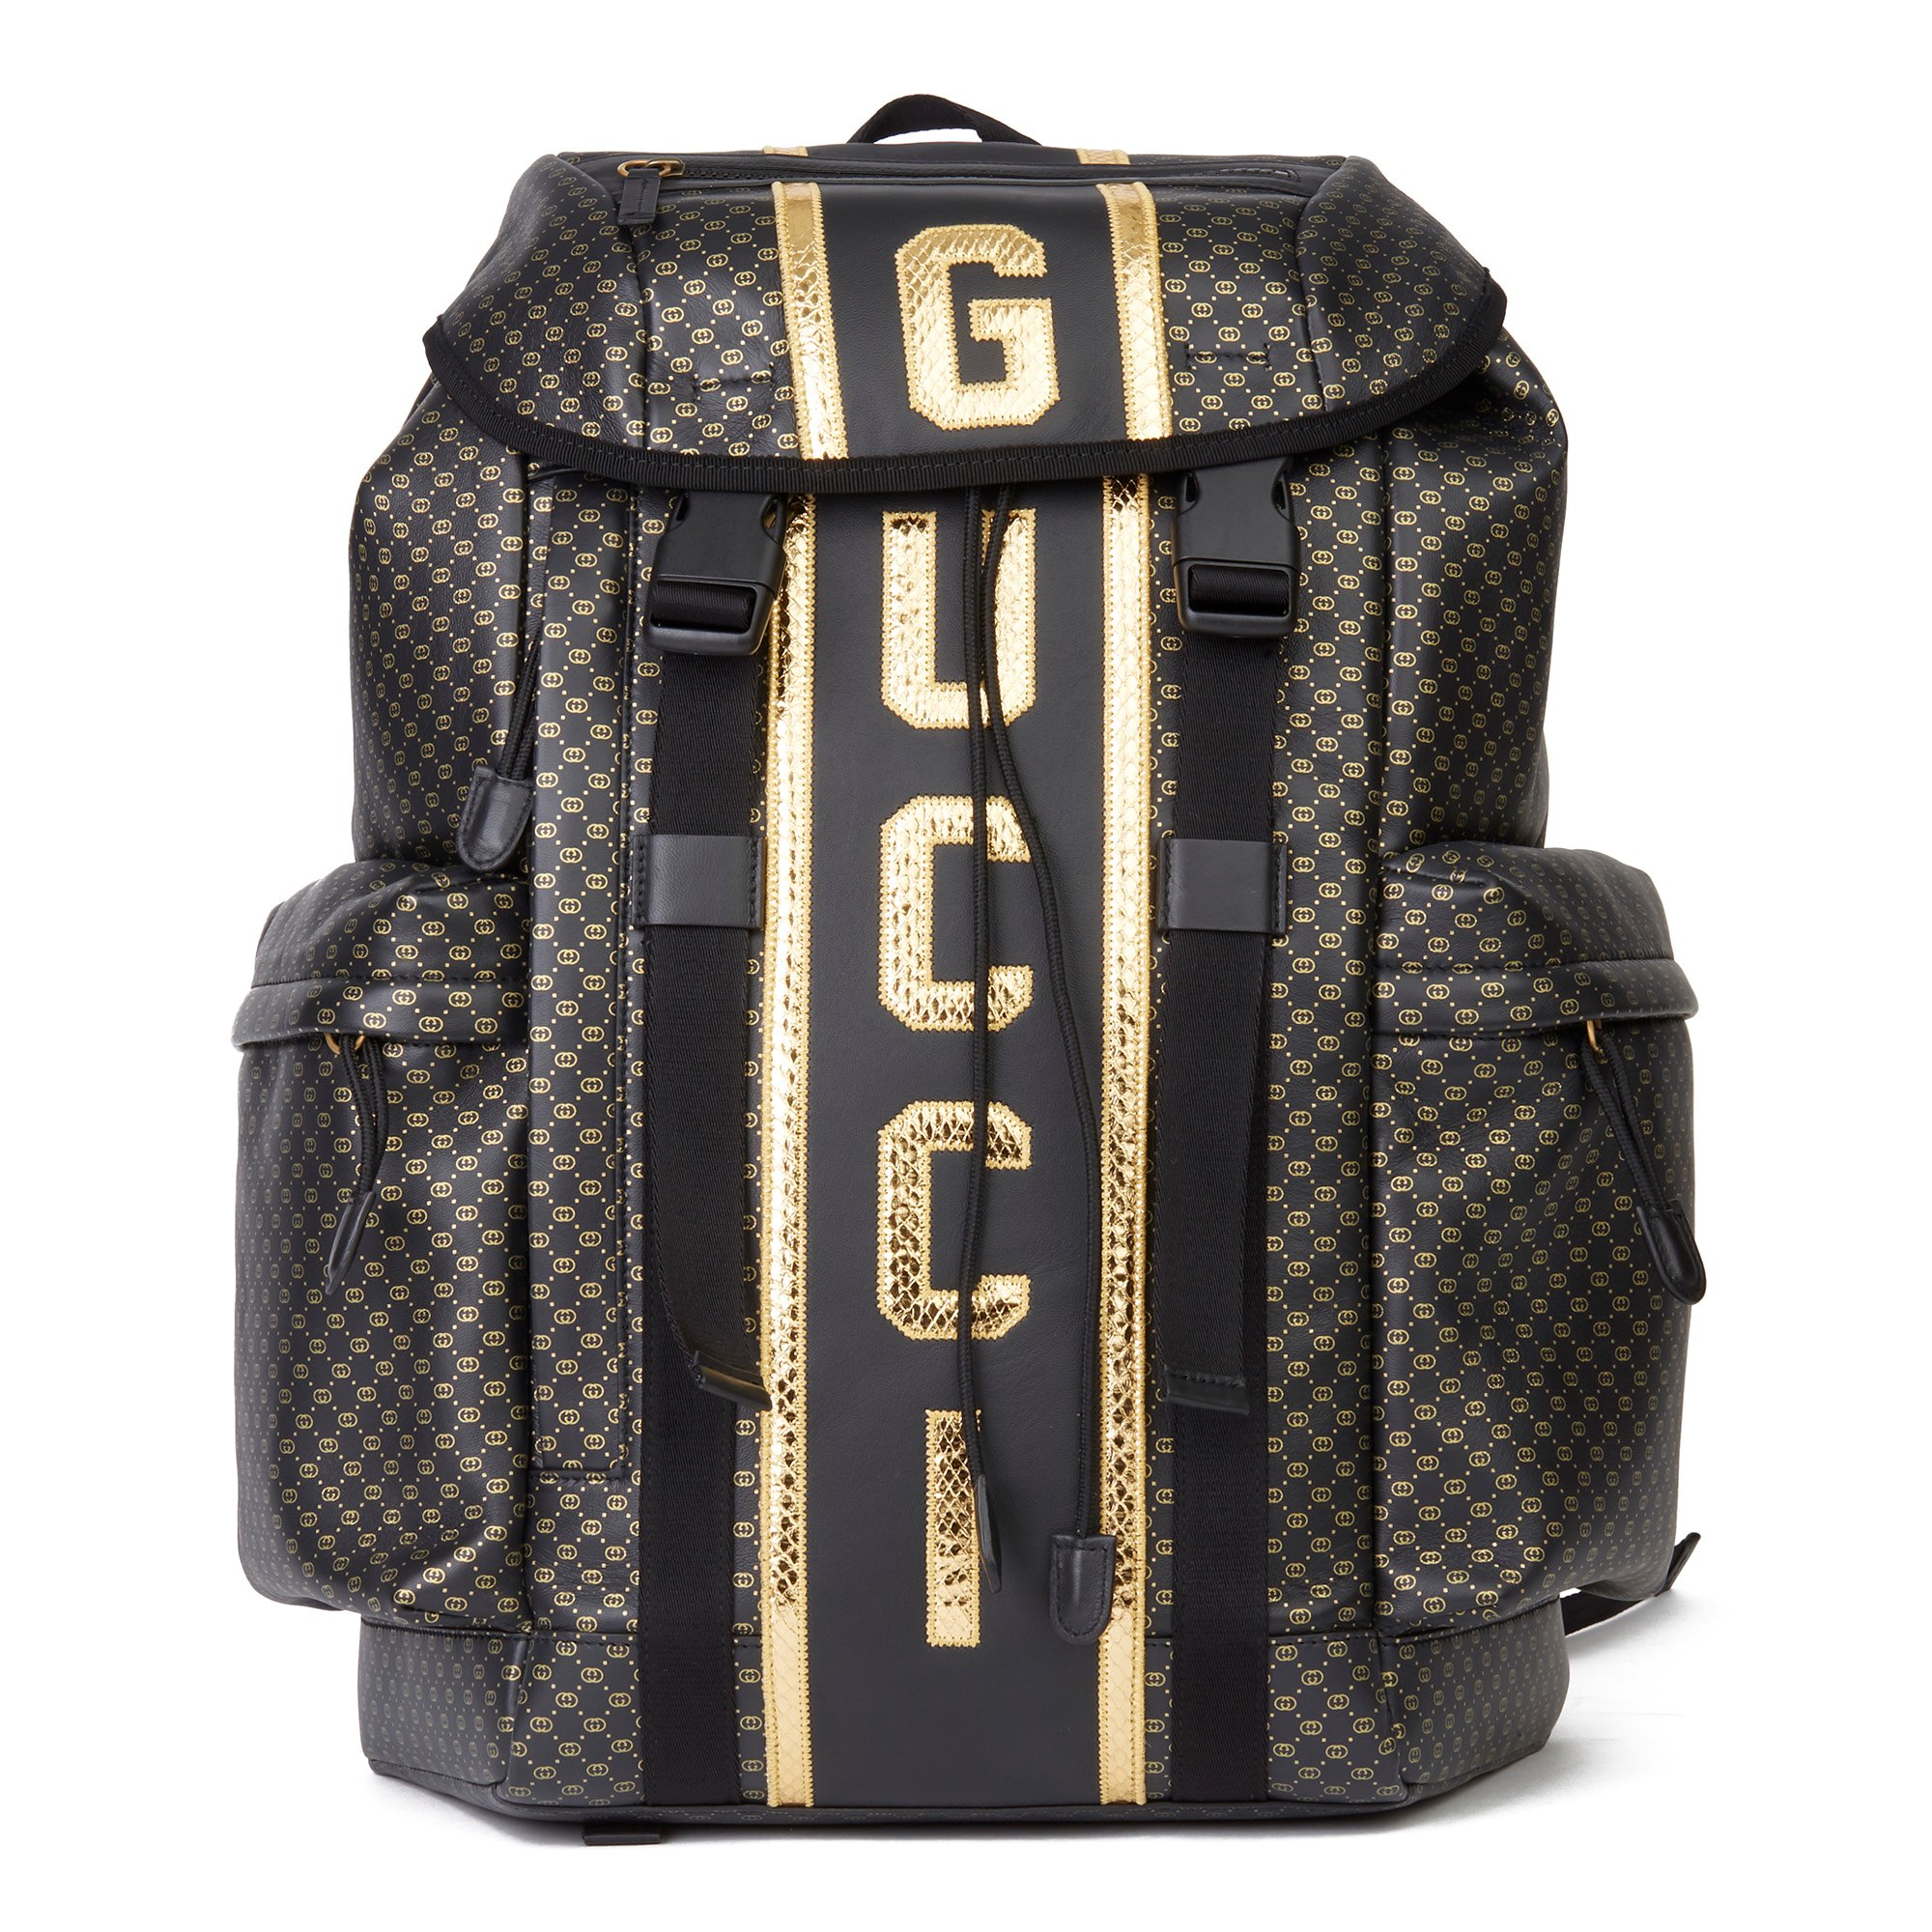 gucci gold backpack